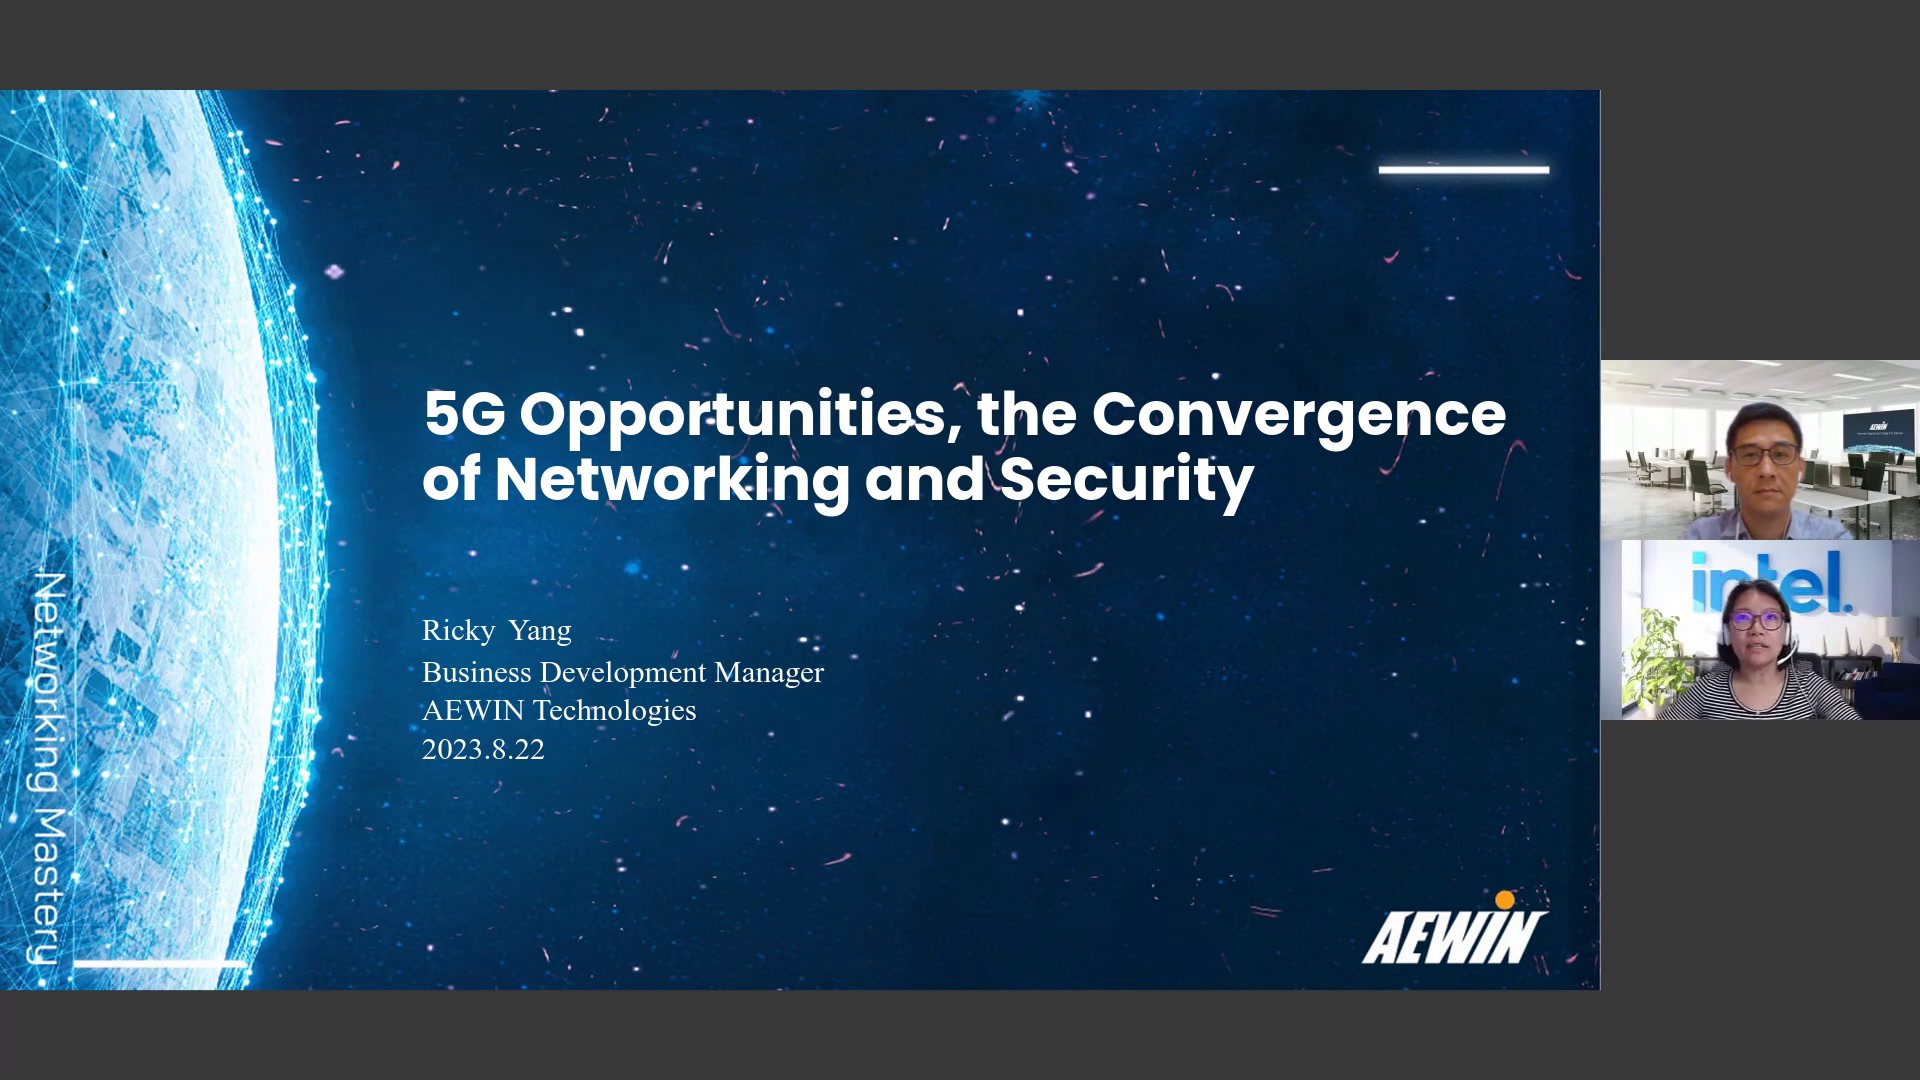 5G Opportunities, the Convergence of Networking and Security